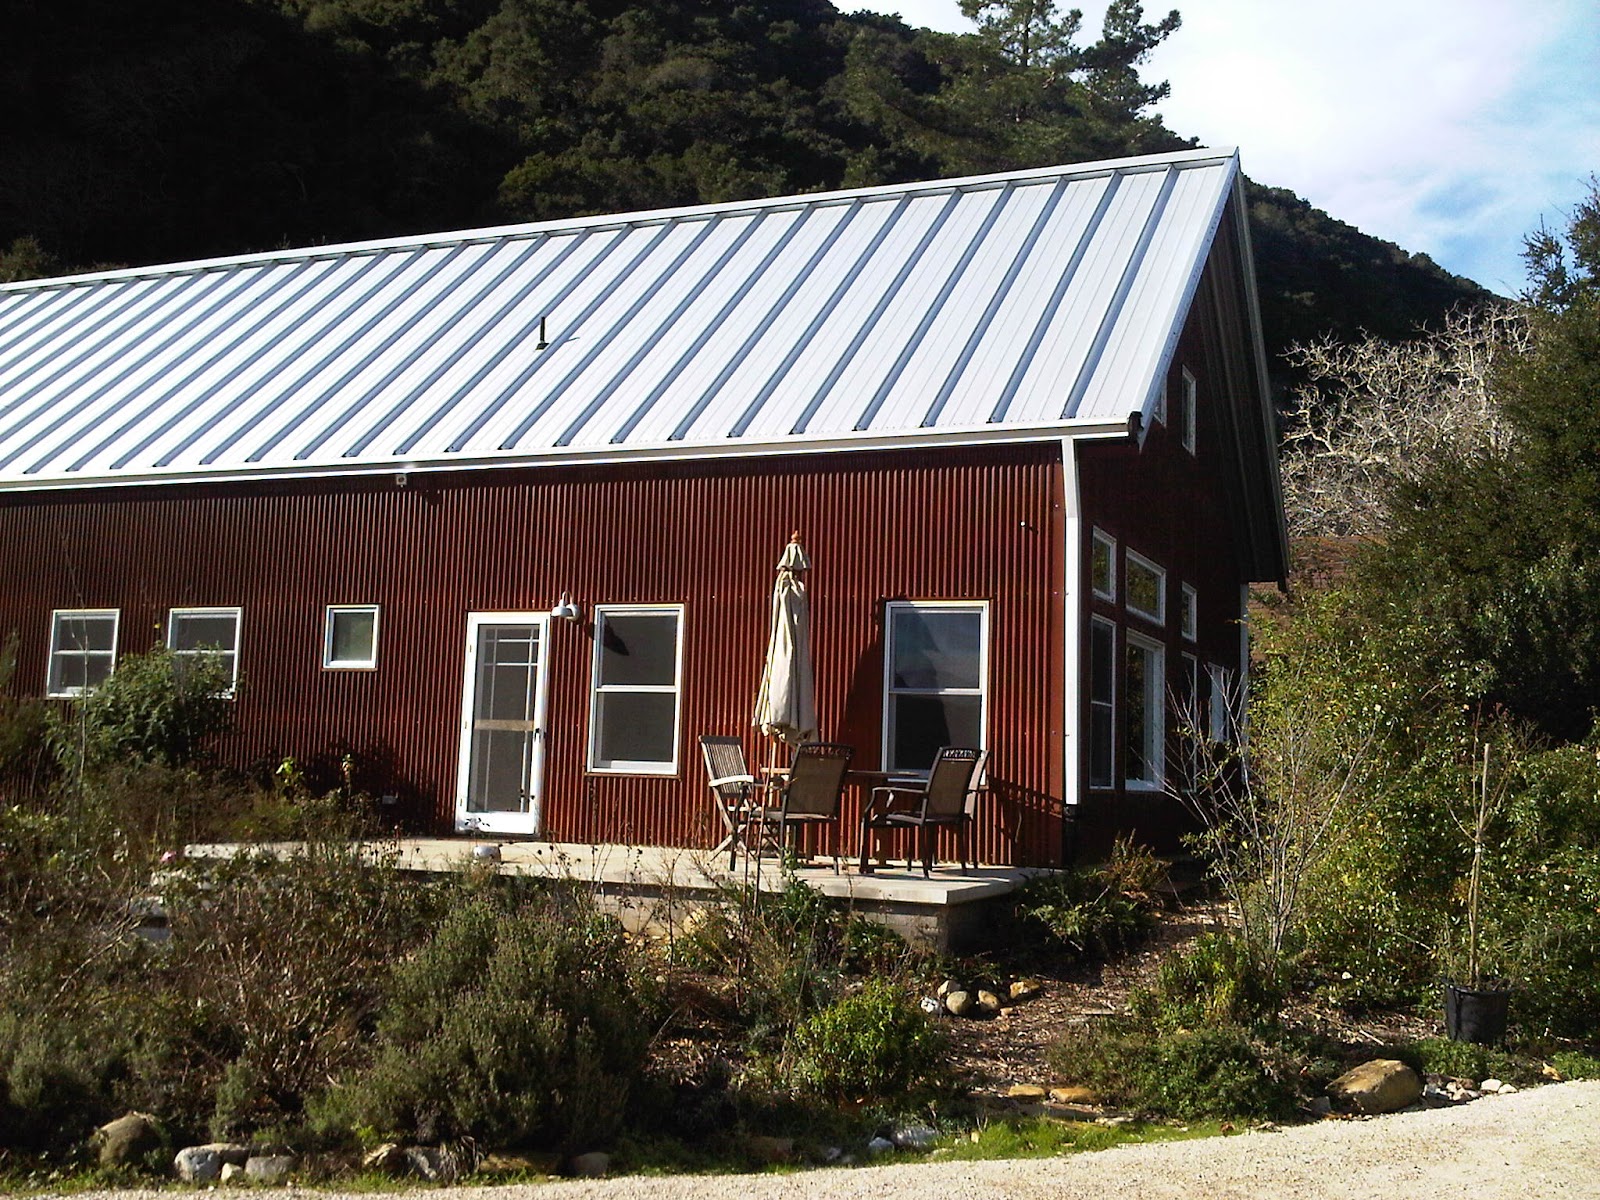 Galvanized vs. Galvalume® Roofing: The Pros And Cons